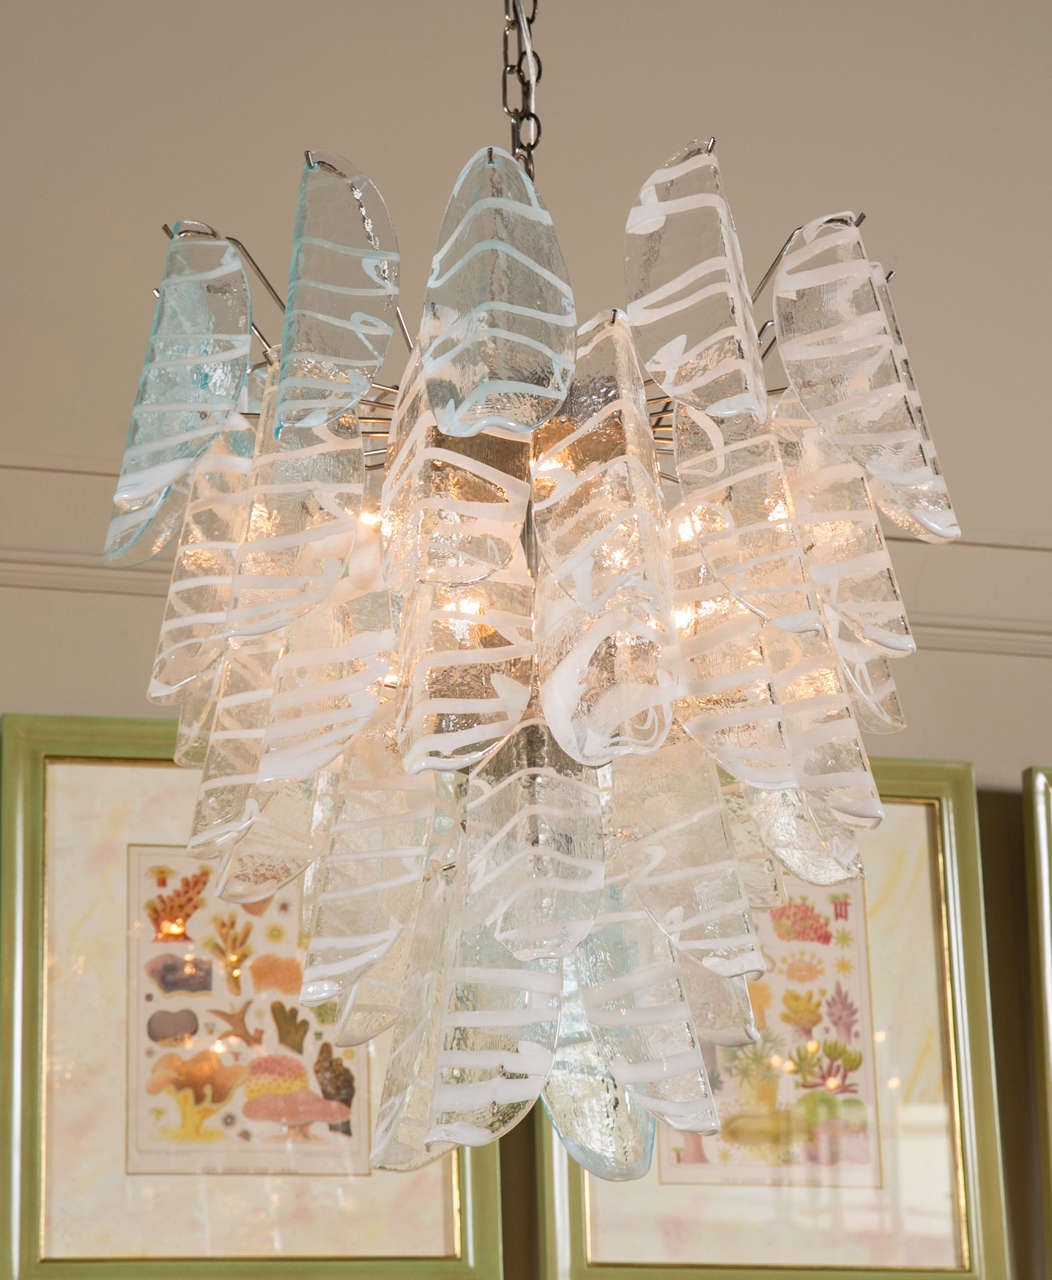 A spectacular Murano glass chandelier with tiered five pendants of clear and light blue prisms.